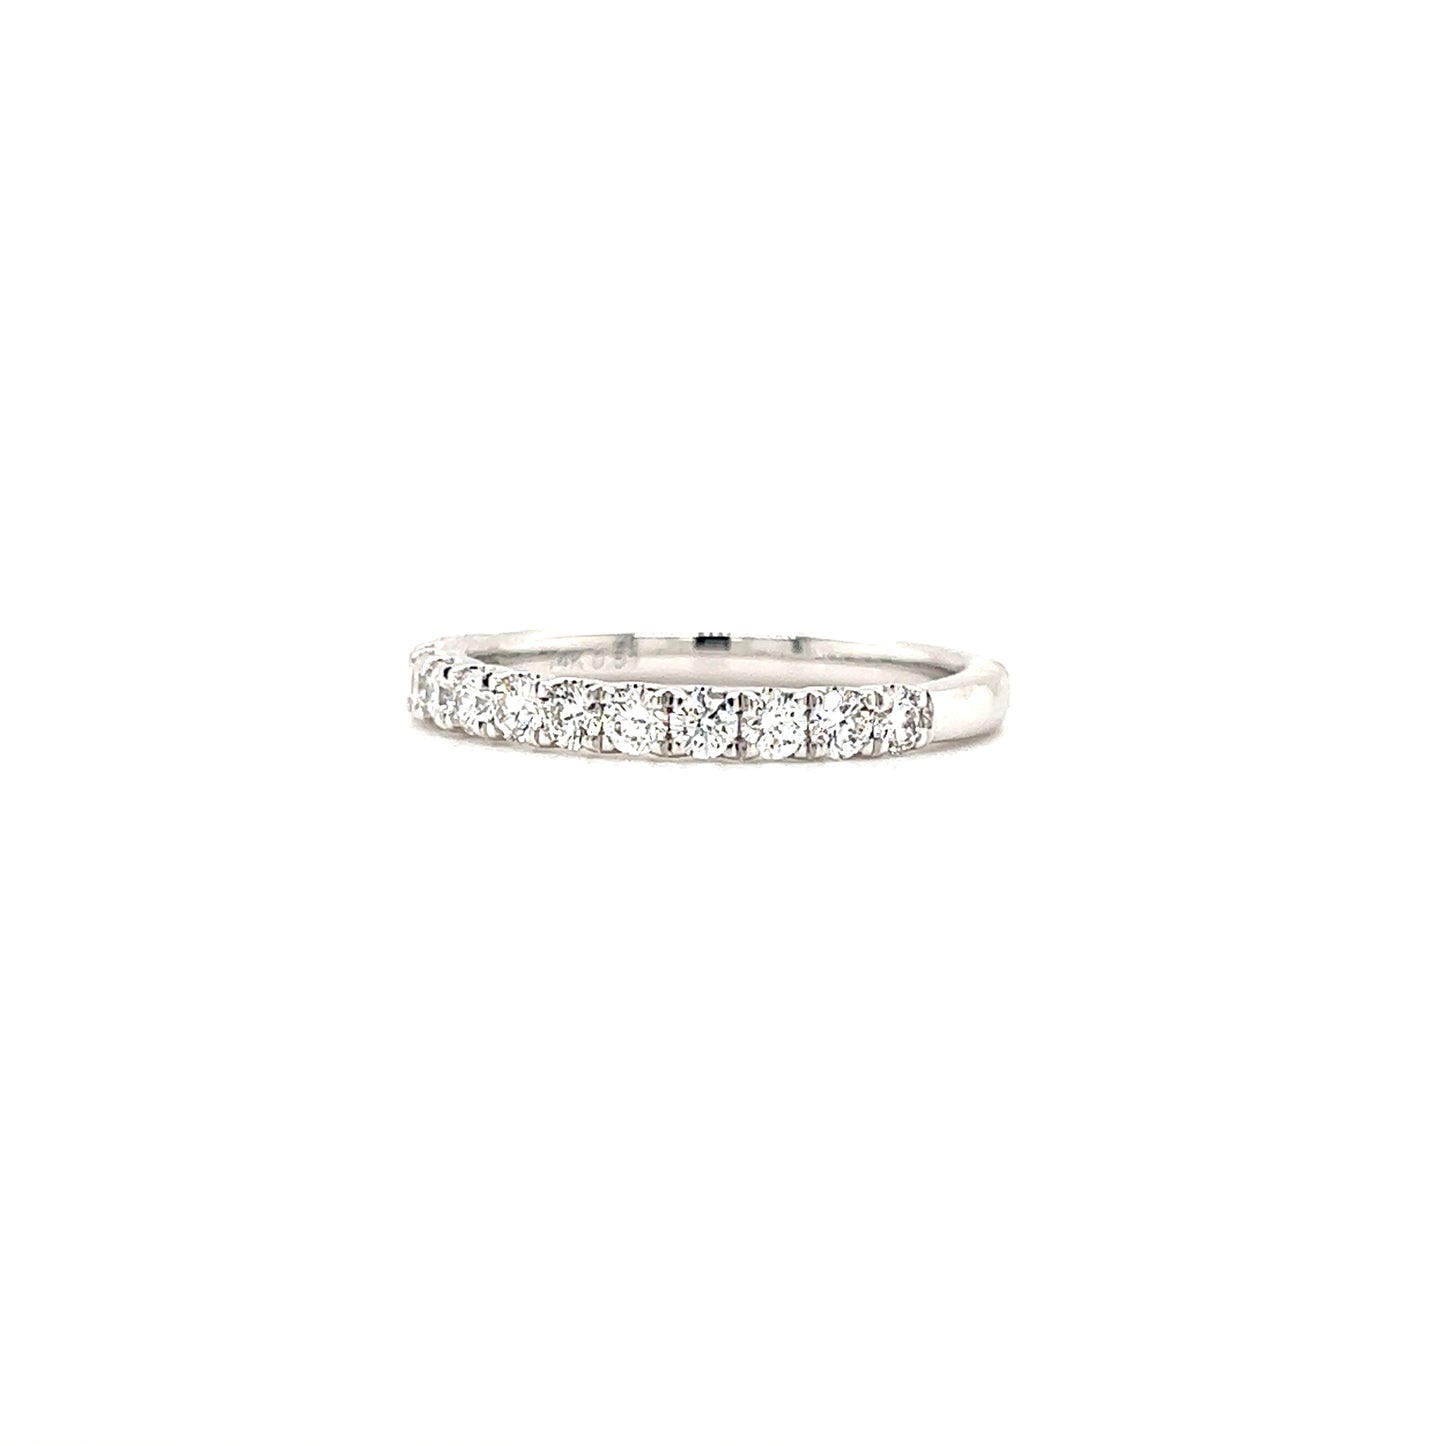 Diamond Ring with 0.51ctw of Diamonds in 14K White Gold Right Side View